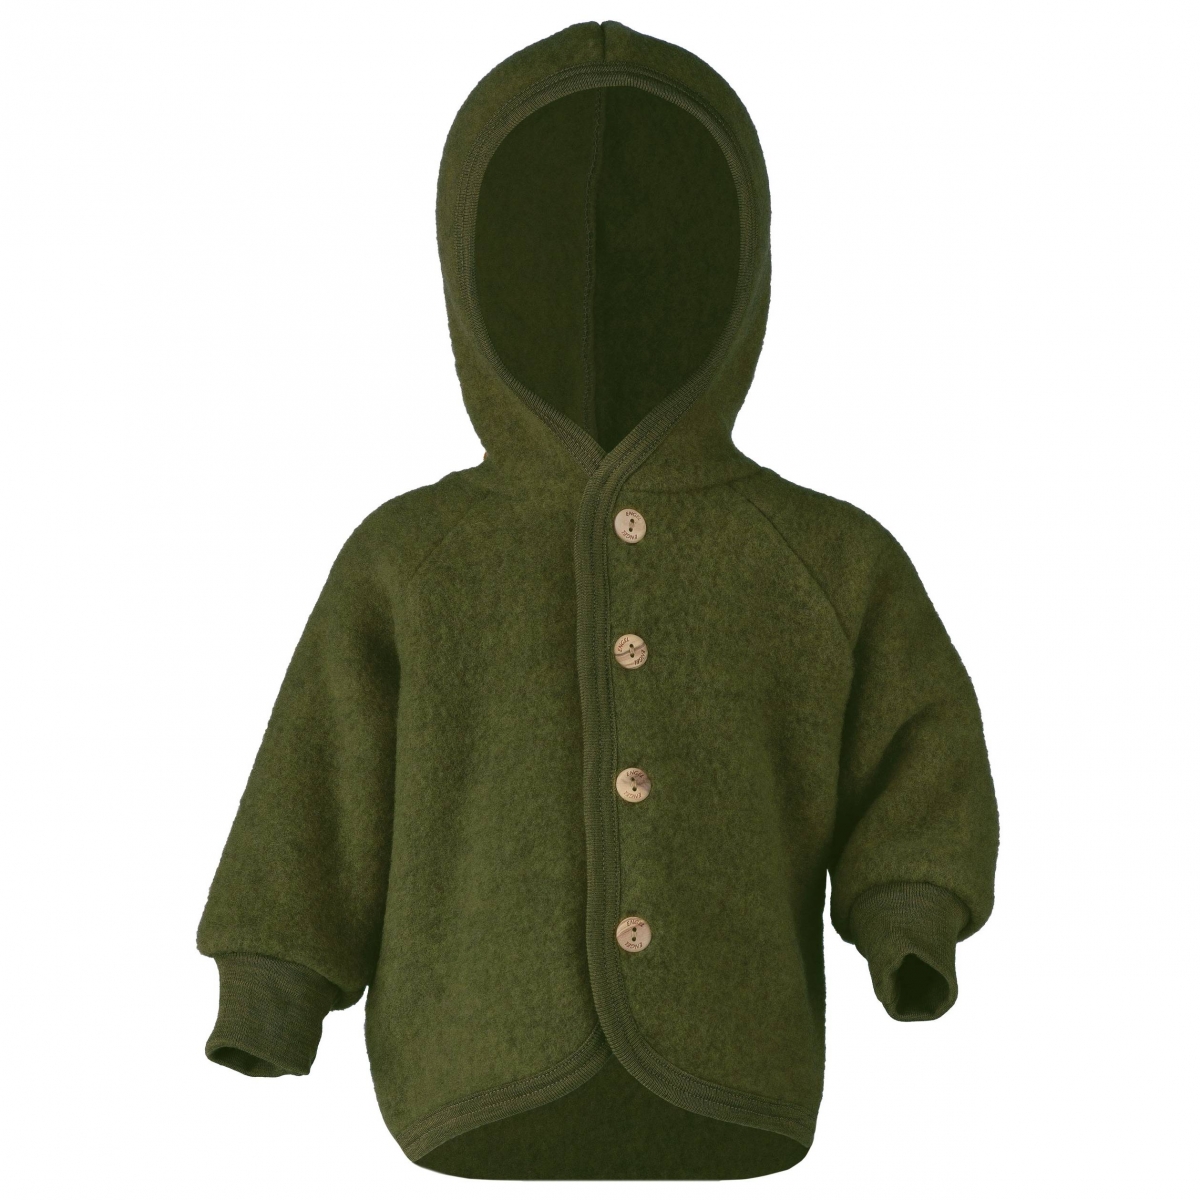 ENGEL Natur Hooded jacket with wooden buttons reed melange 575520-044E 